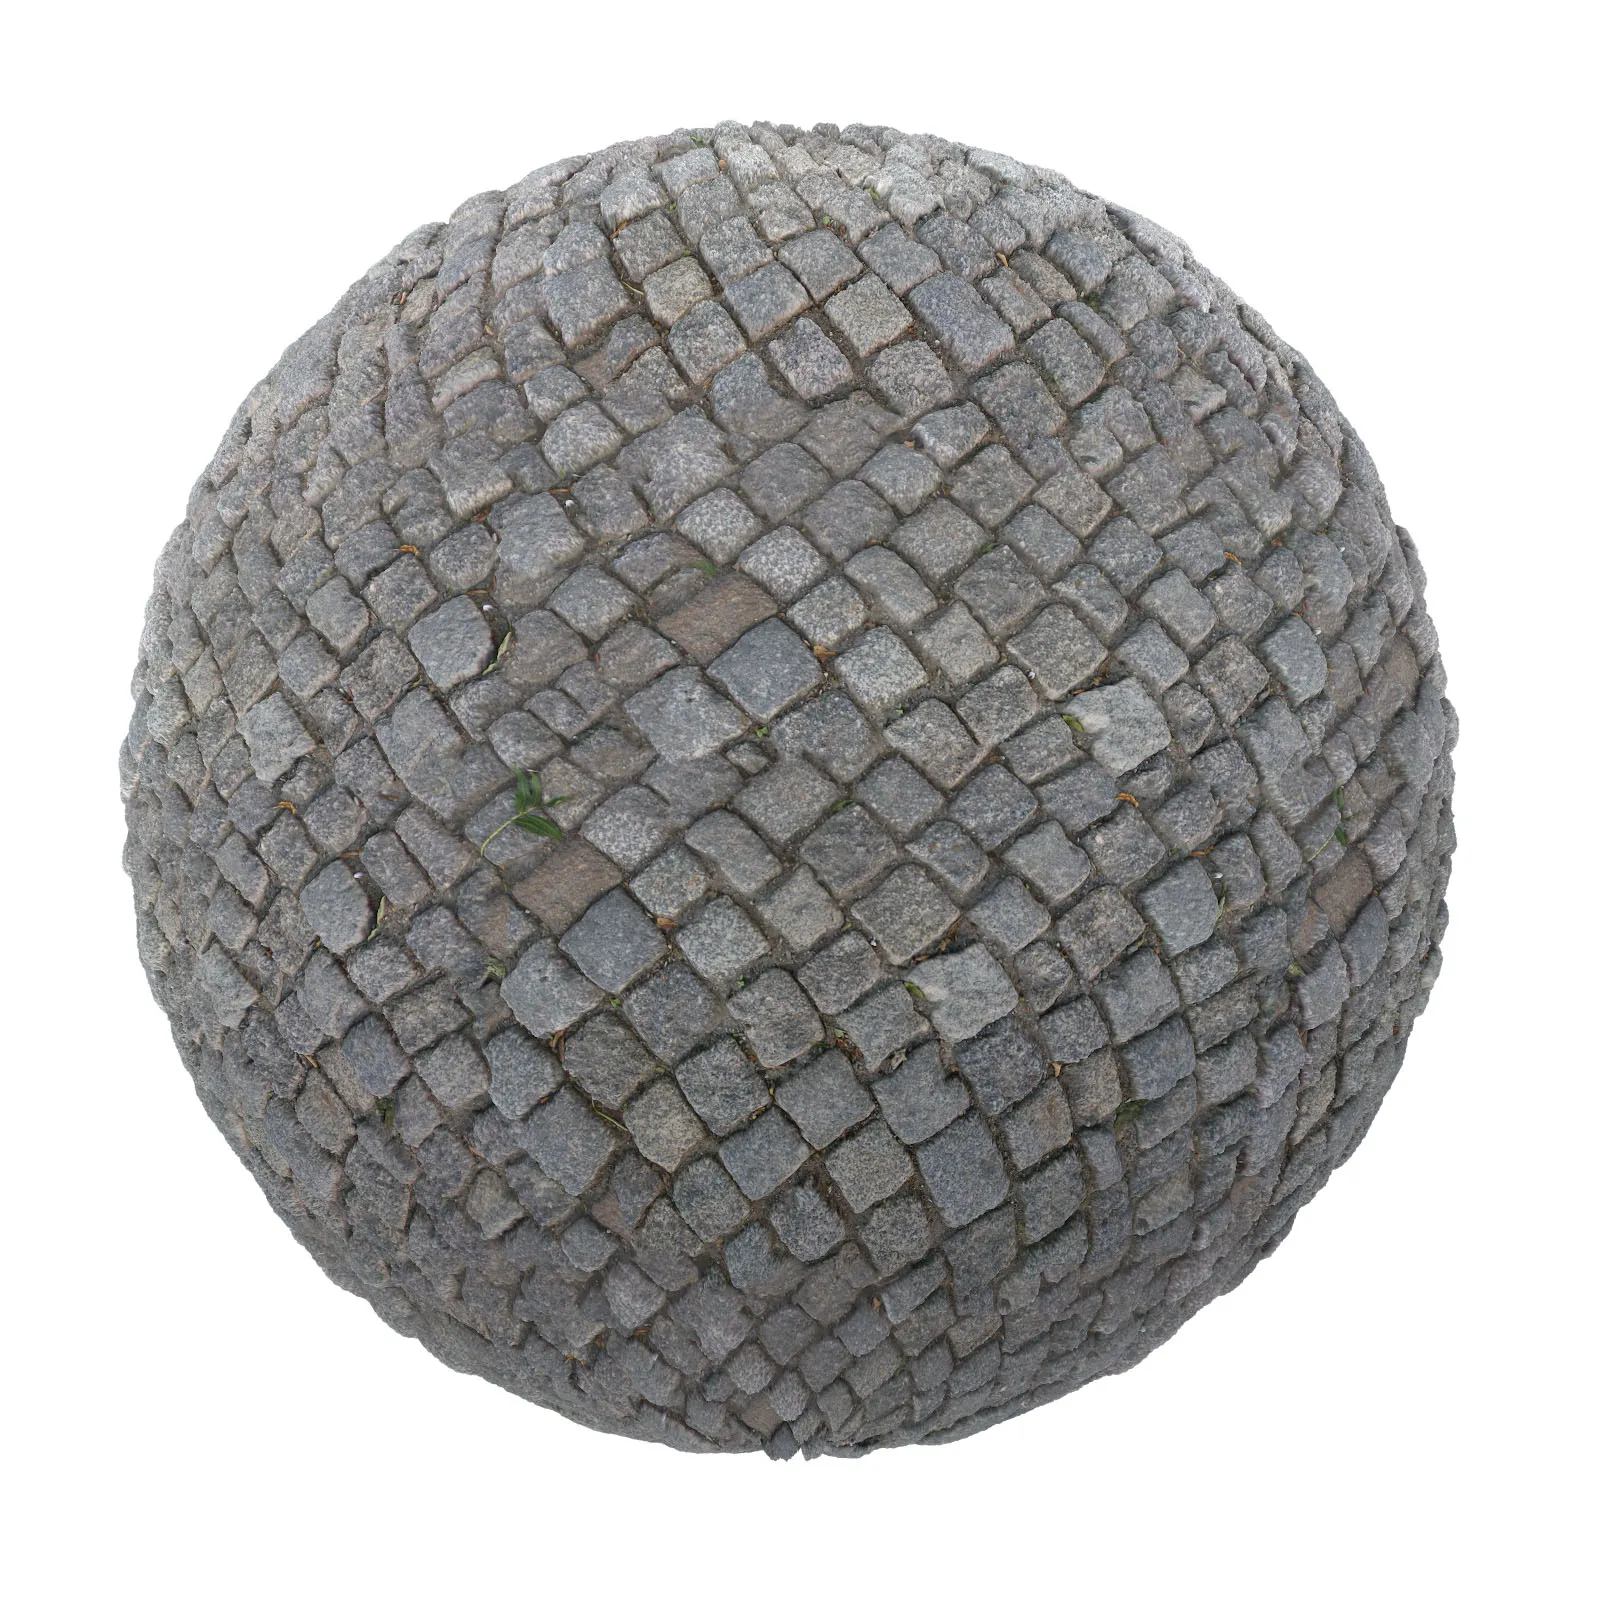 PBR CGAXIS TEXTURES – PAVEMENTS – Stone Pavement 2